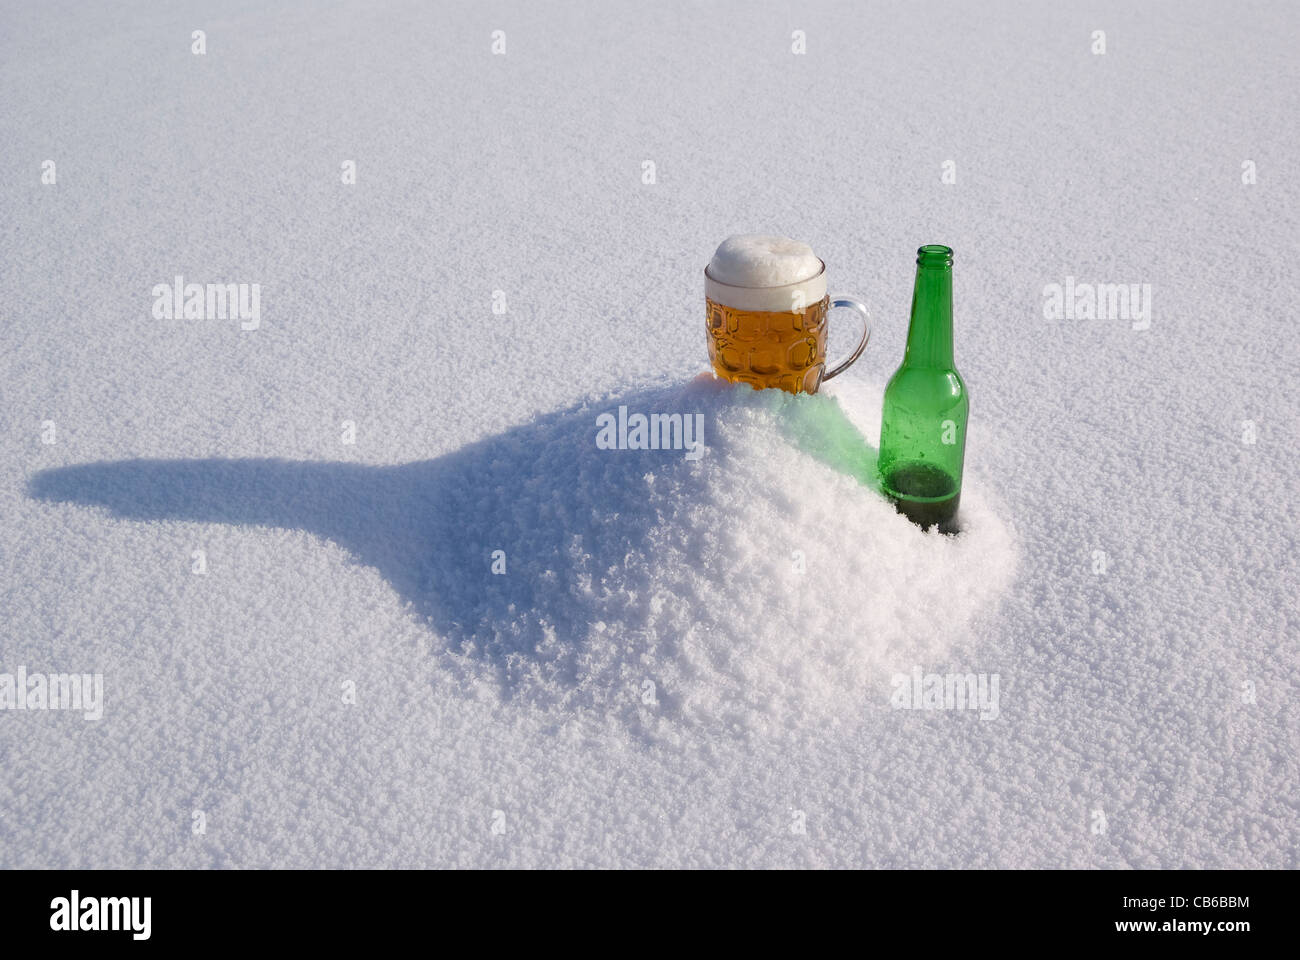 beer in glass and green bottle on snow Stock Photo